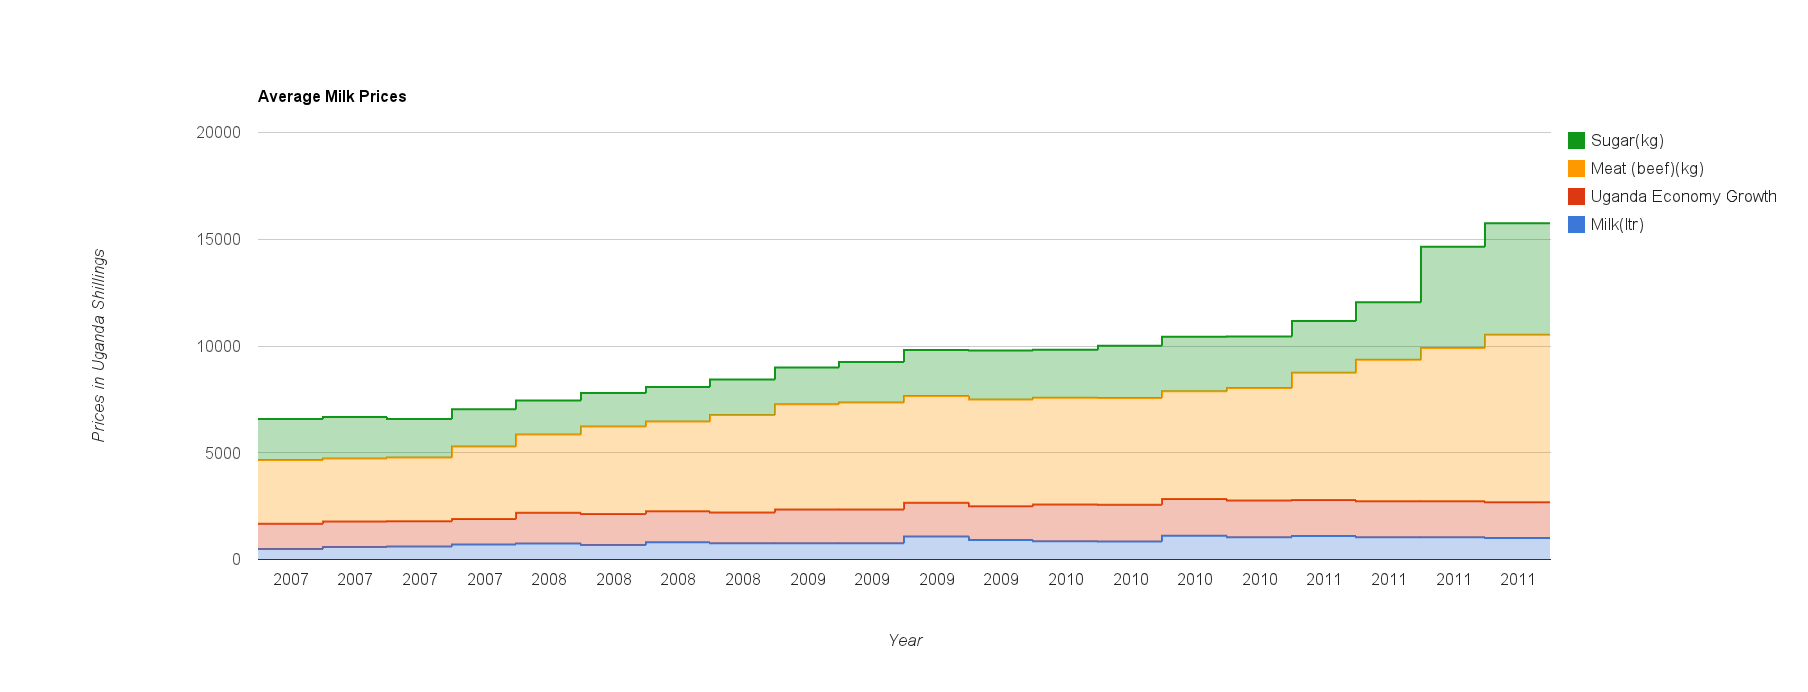 Average Market prices for Uganda from 2007 – 2011 data visualization by the cowteam at the meetup